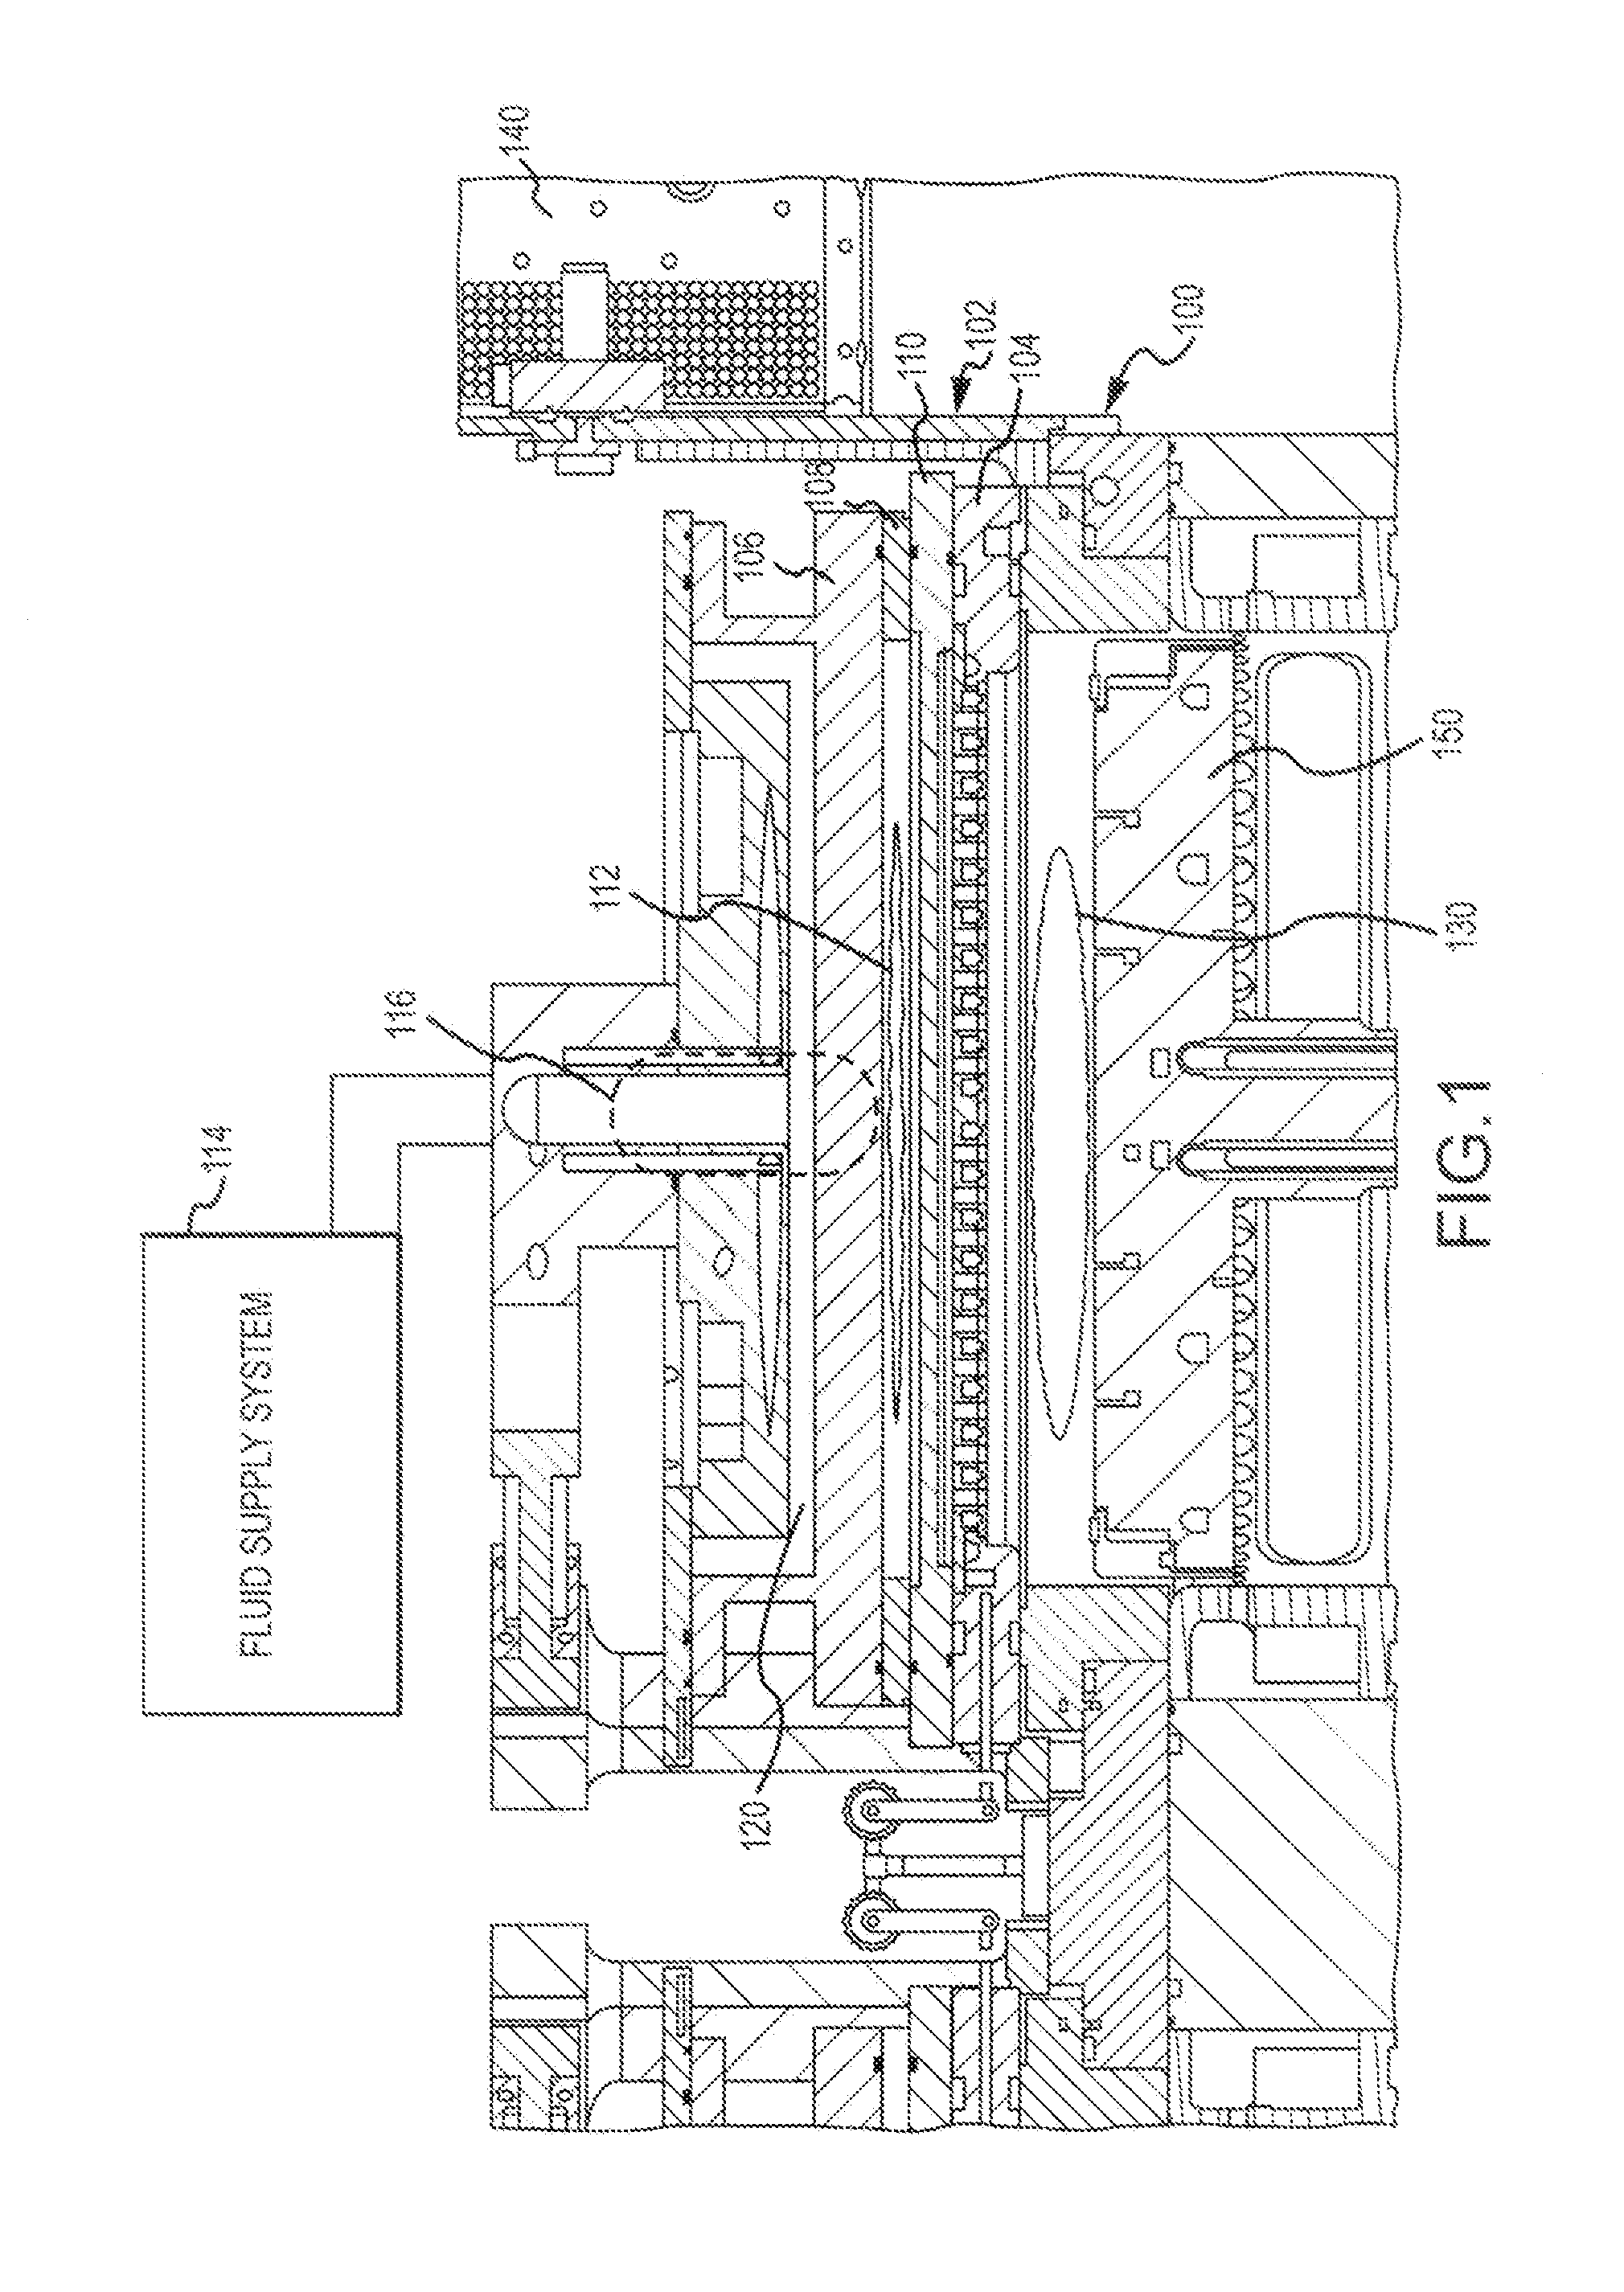 Semiconductor processing system and methods using capacitively coupled plasma